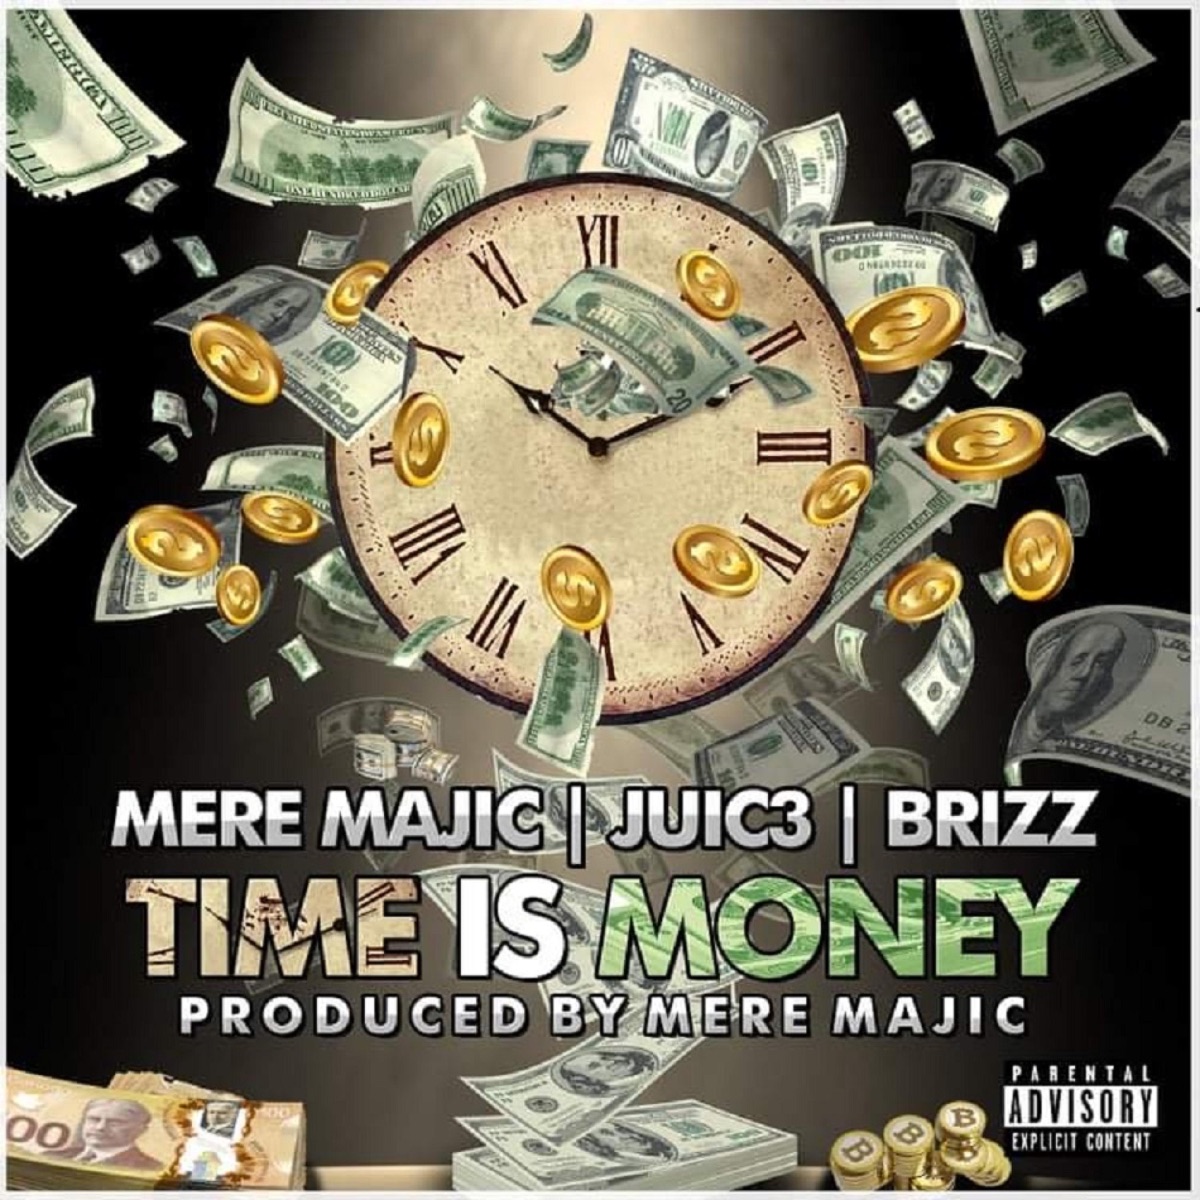 Mere Majic - Time Is Money (feat. Juic3 & Brizz) - Single